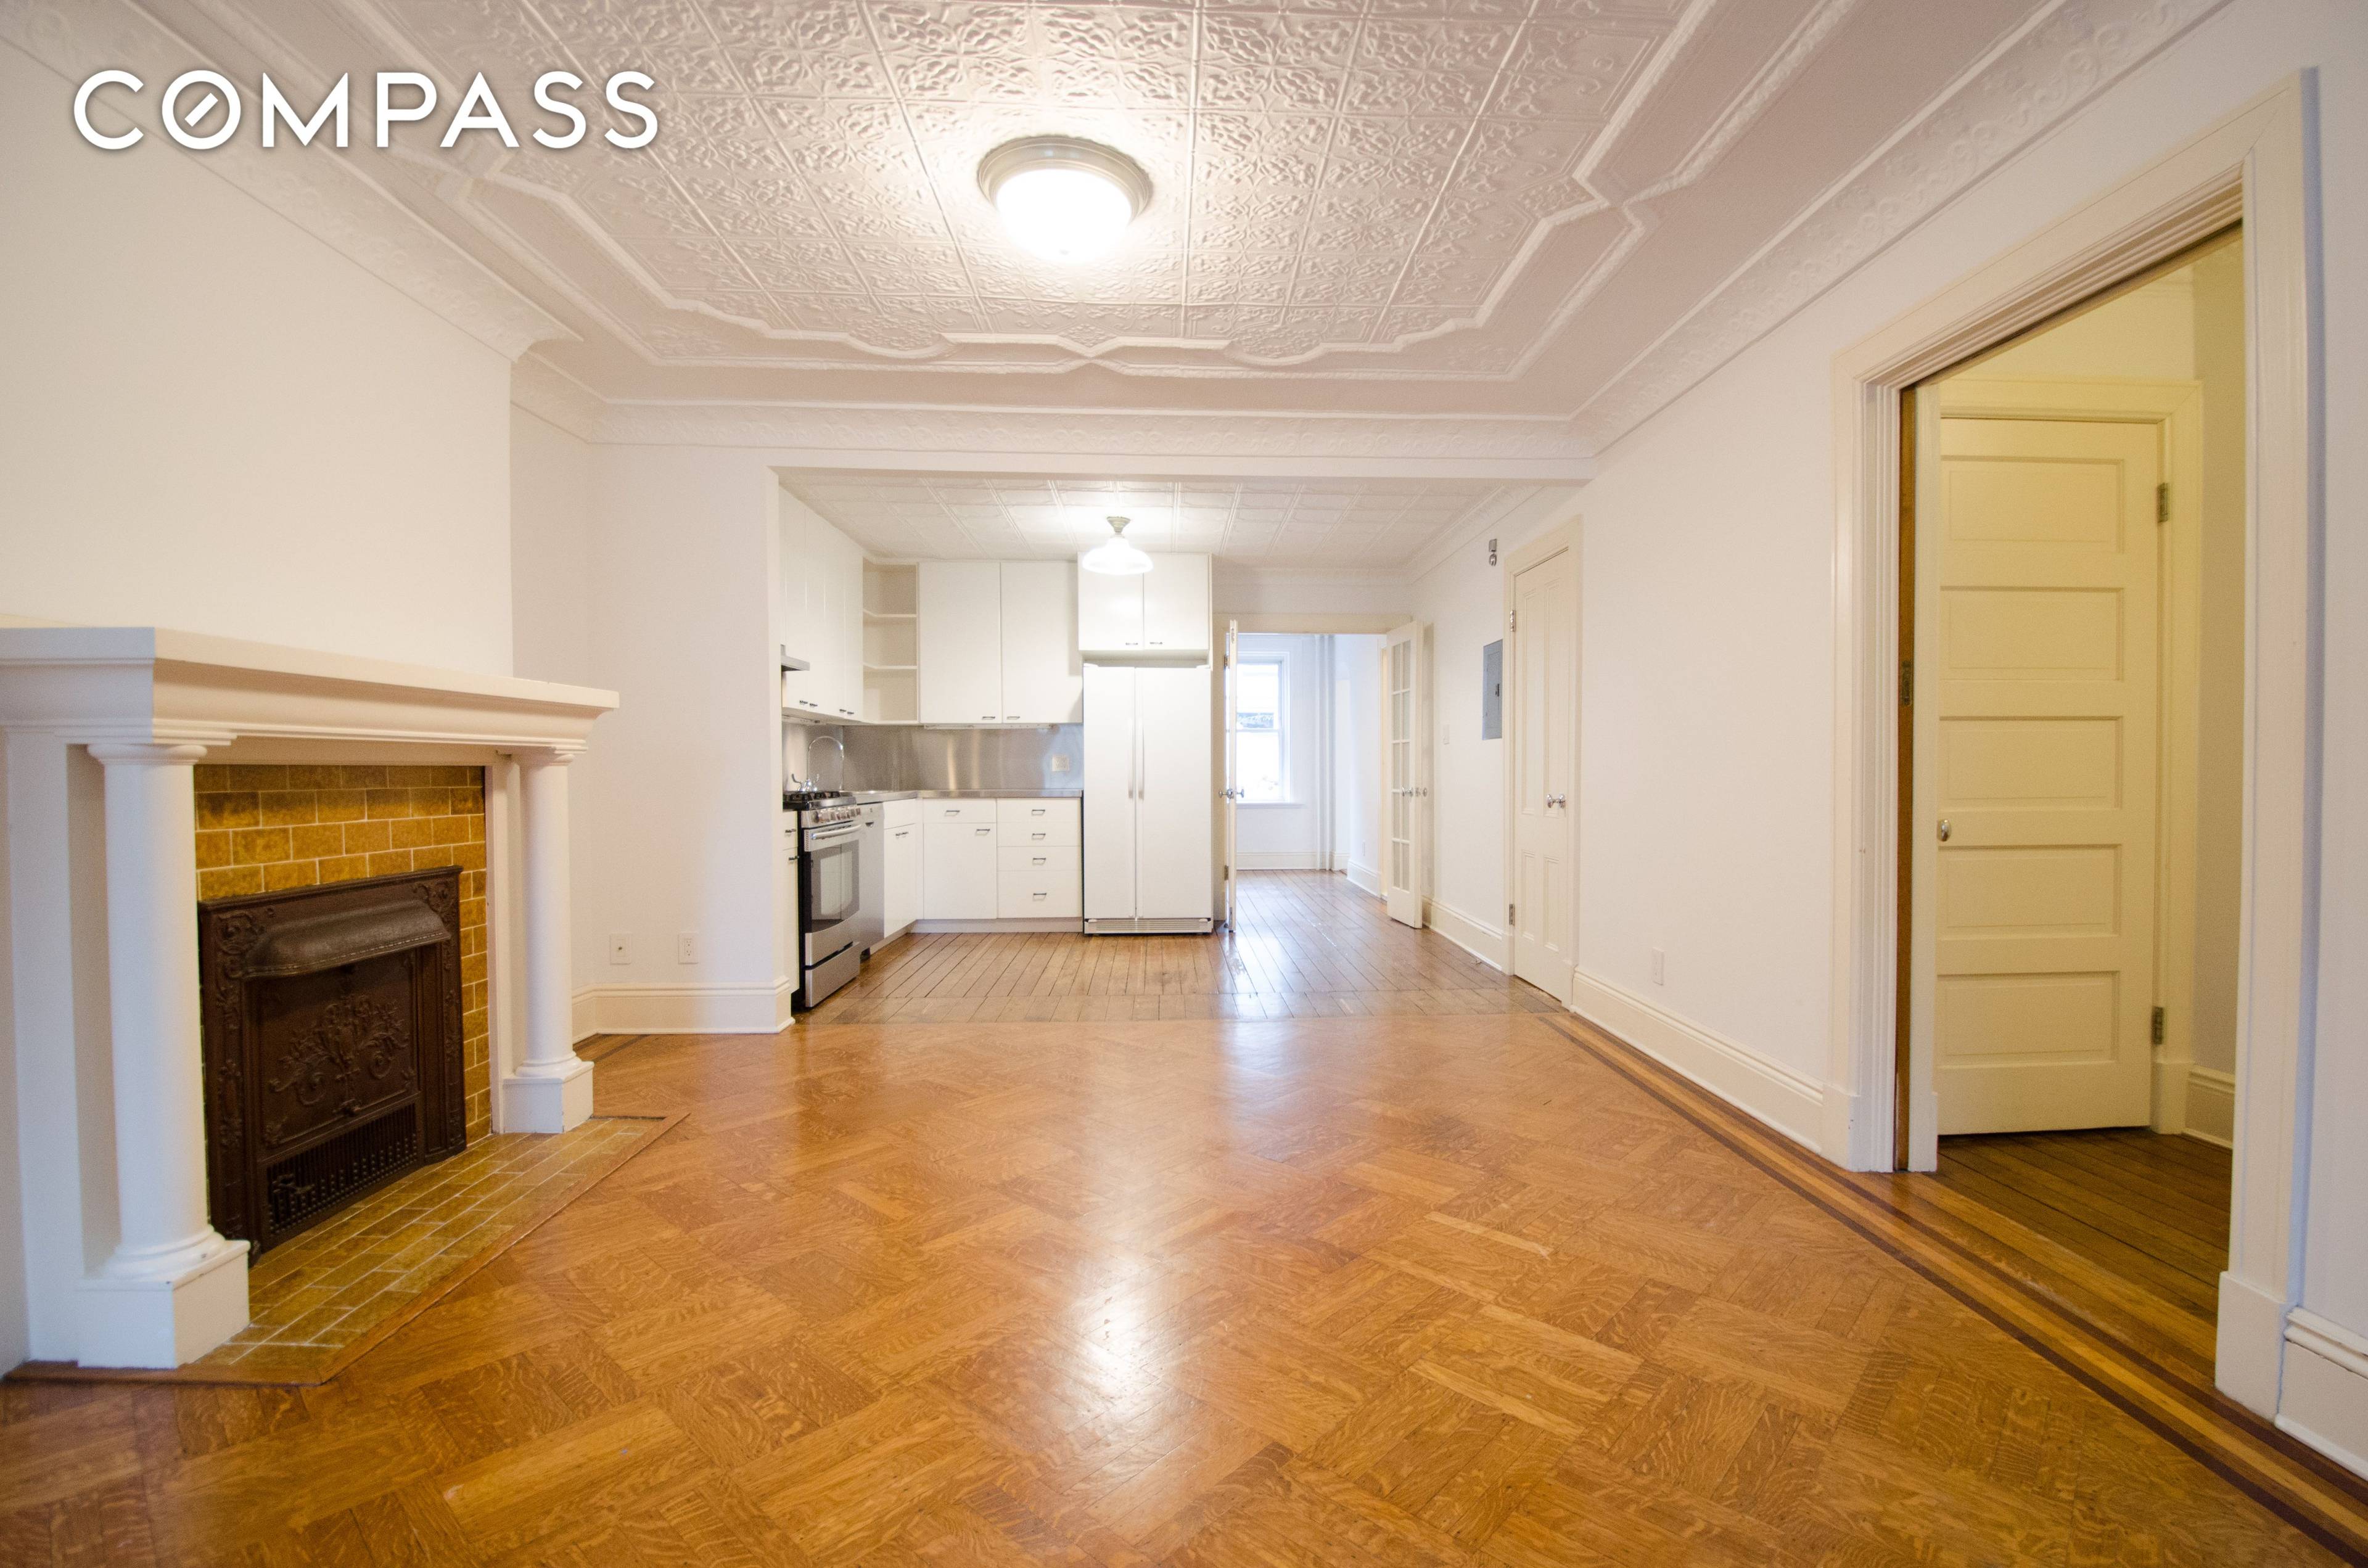 Expansive garden rental in one of the widest brownstones in all of Park Slope.